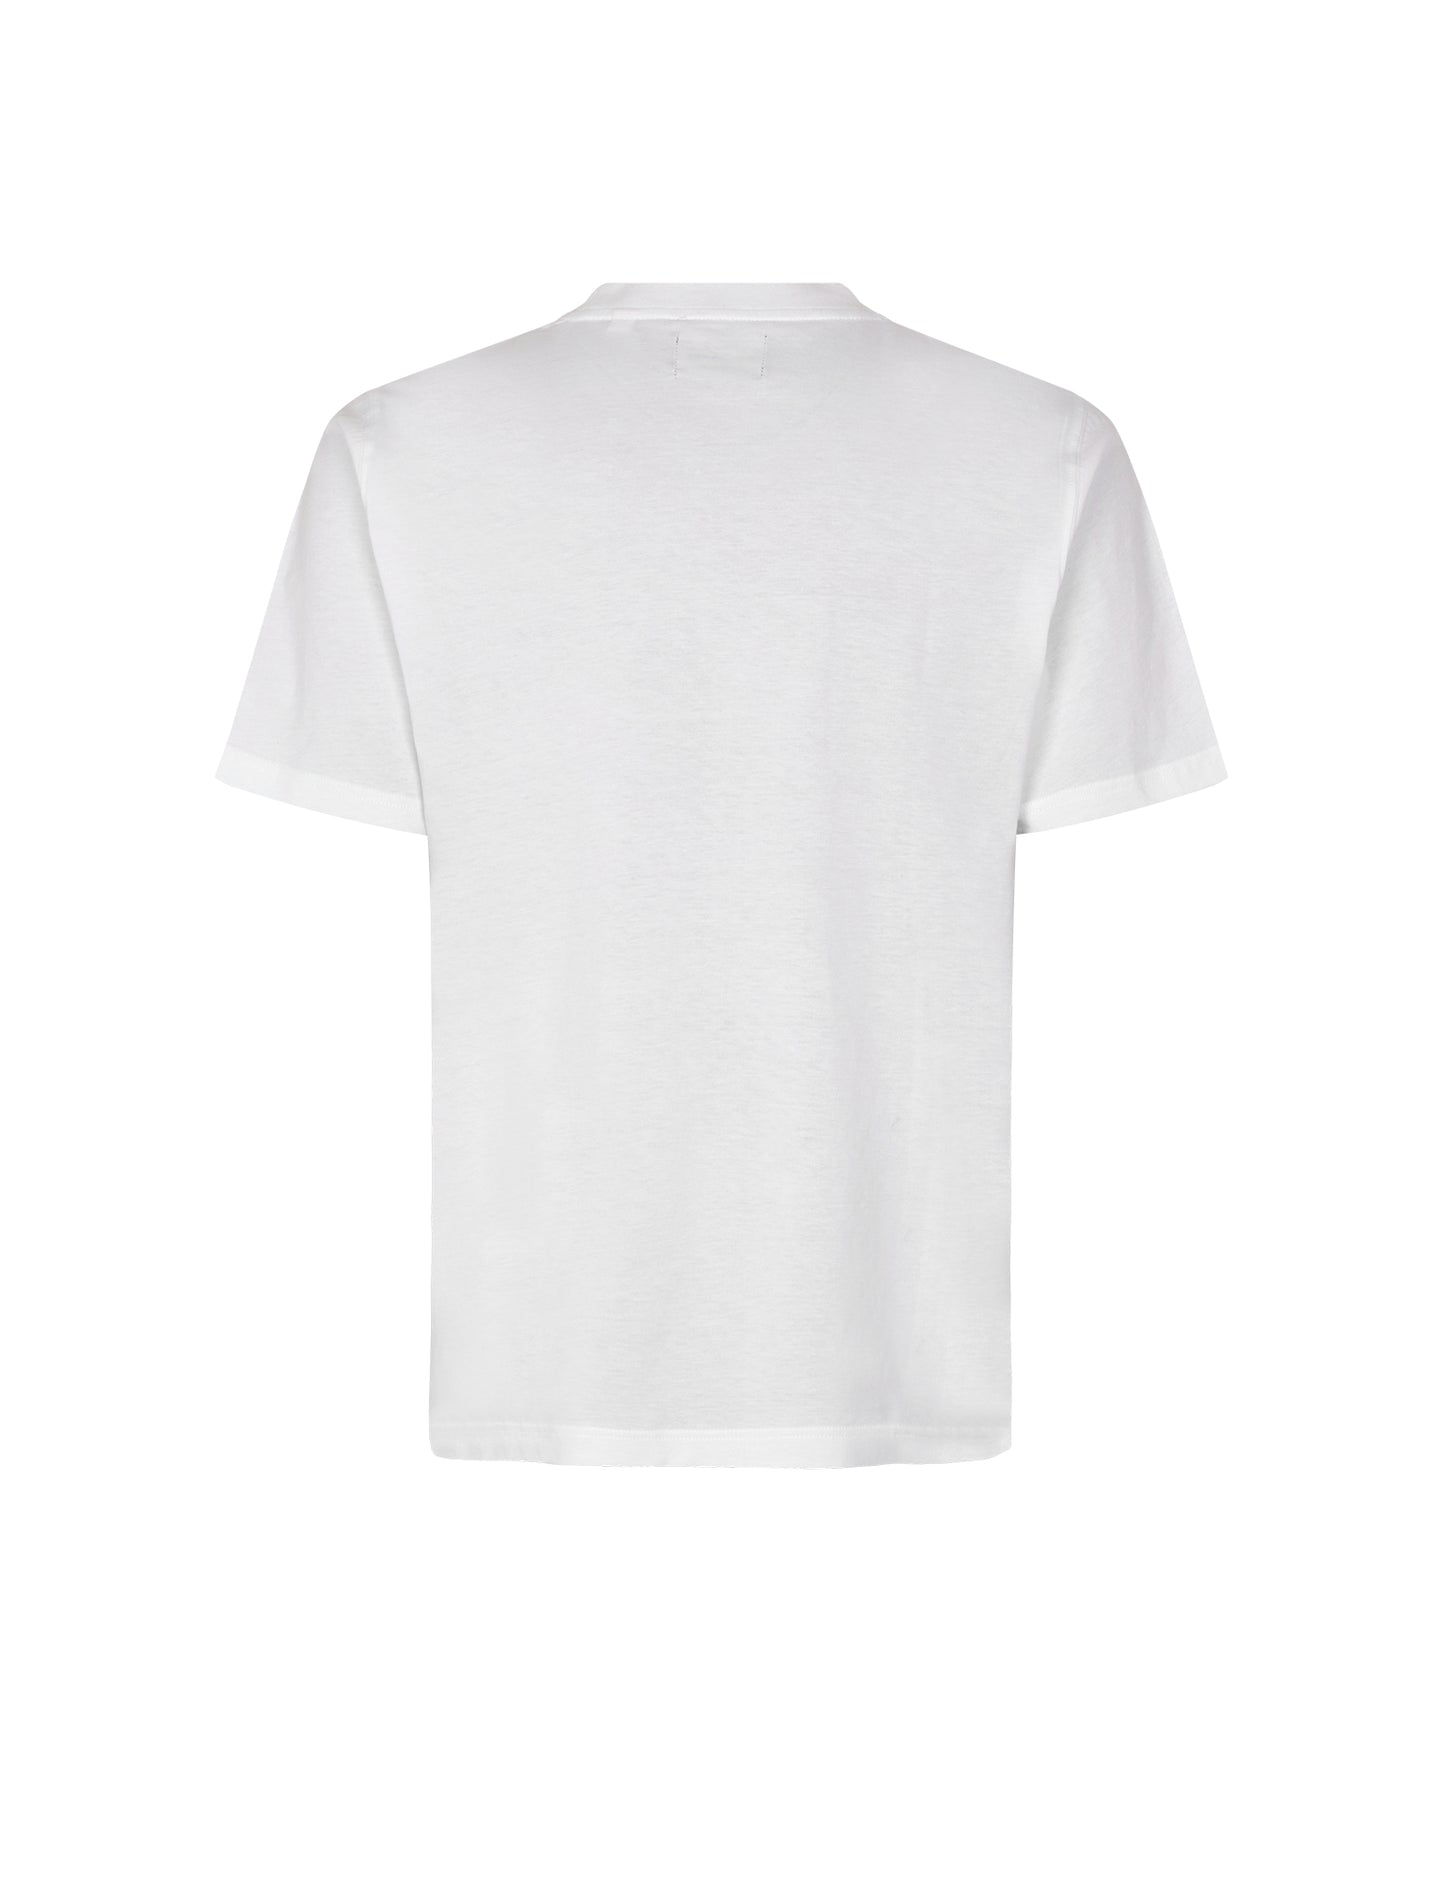 Cotton Jersey Frode Transmission Tee, White